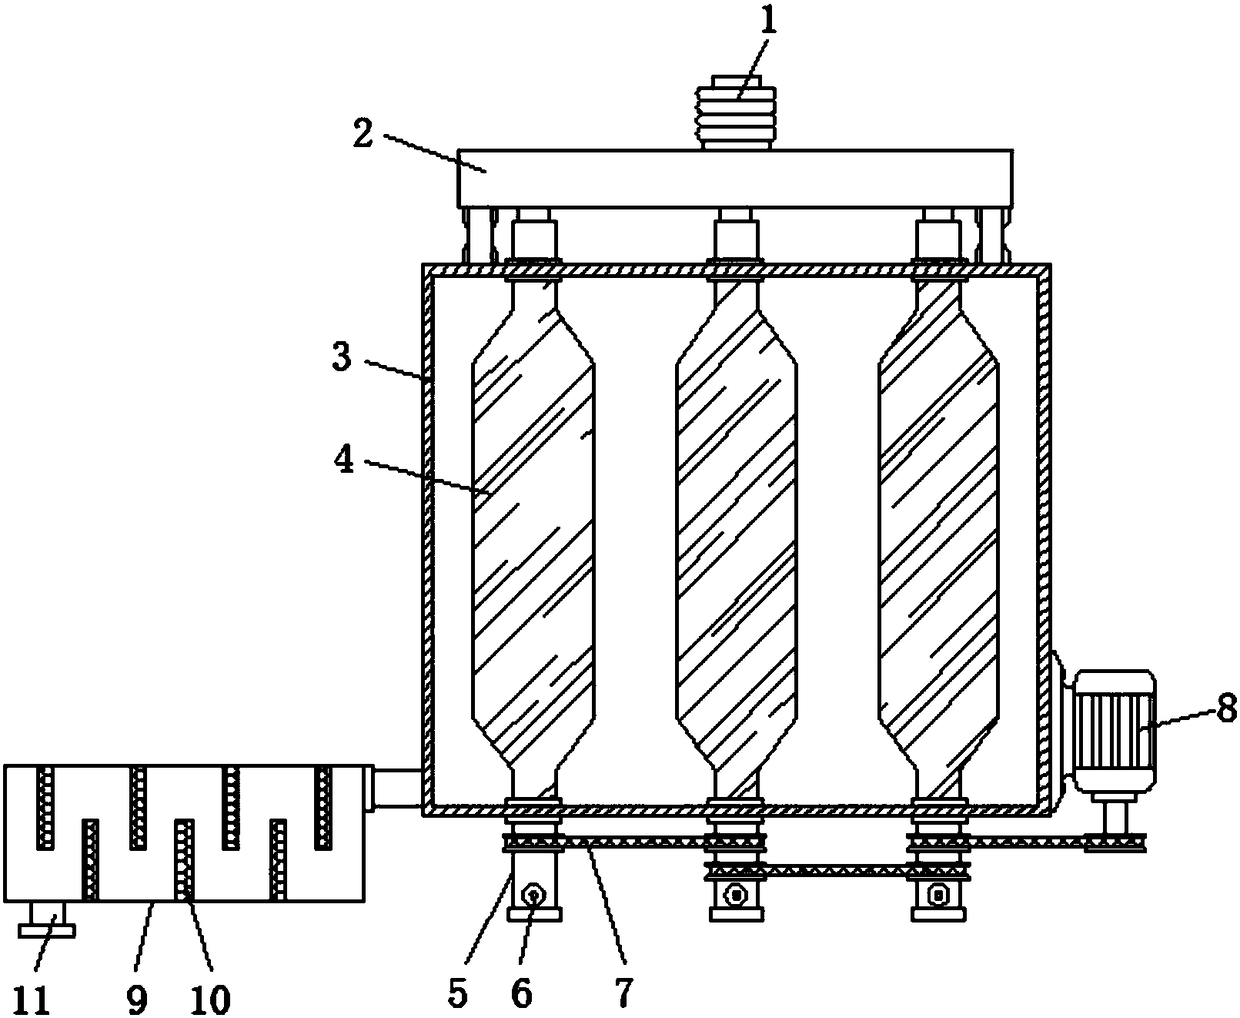 Wastewater centrifugal treatment device